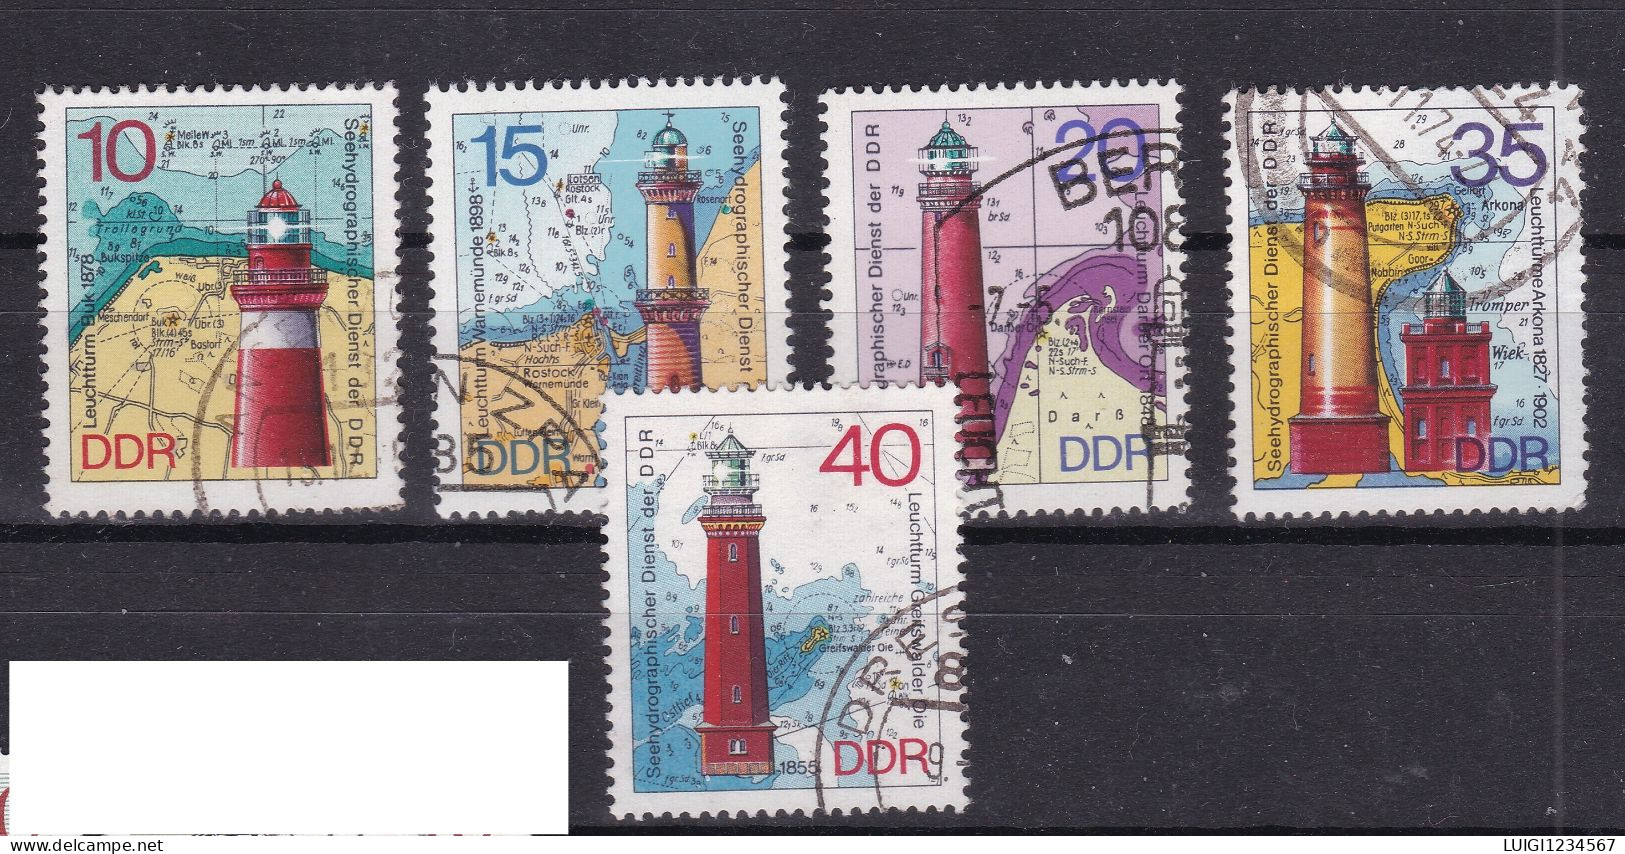 MICHEL NR  1953/1957 - Used Stamps